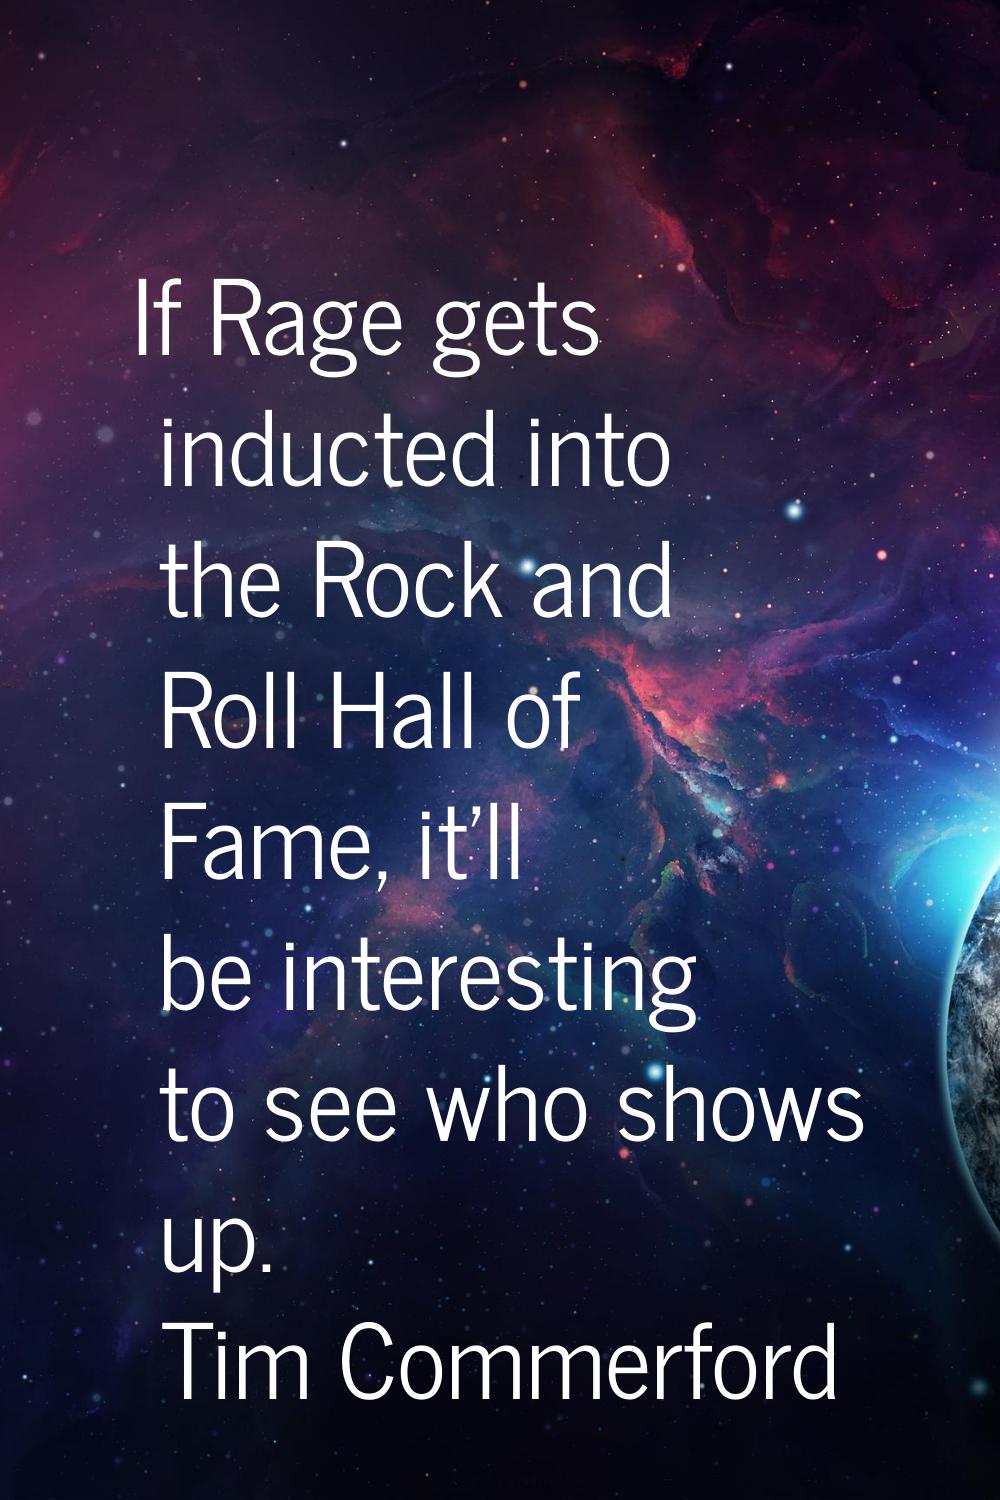 If Rage gets inducted into the Rock and Roll Hall of Fame, it'll be interesting to see who shows up